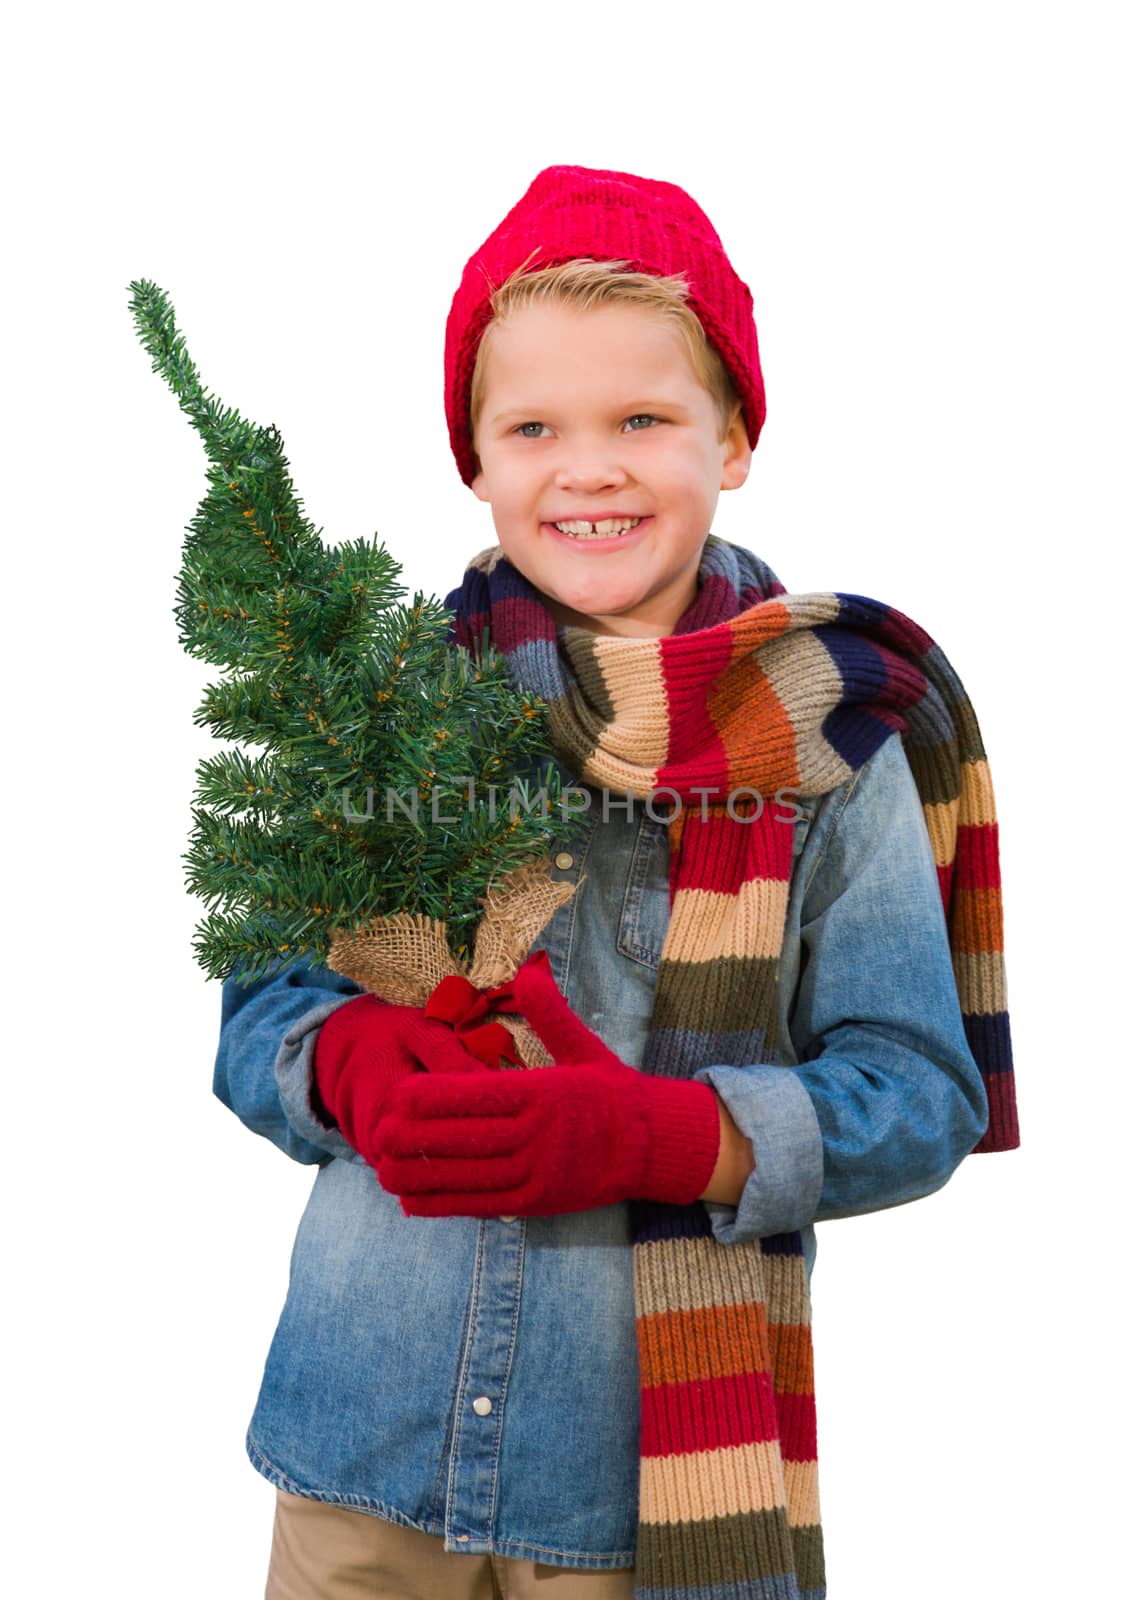 Young Boy Wearing Mittens and Scarf Holding Christmas Tree Isolated on a White Background.